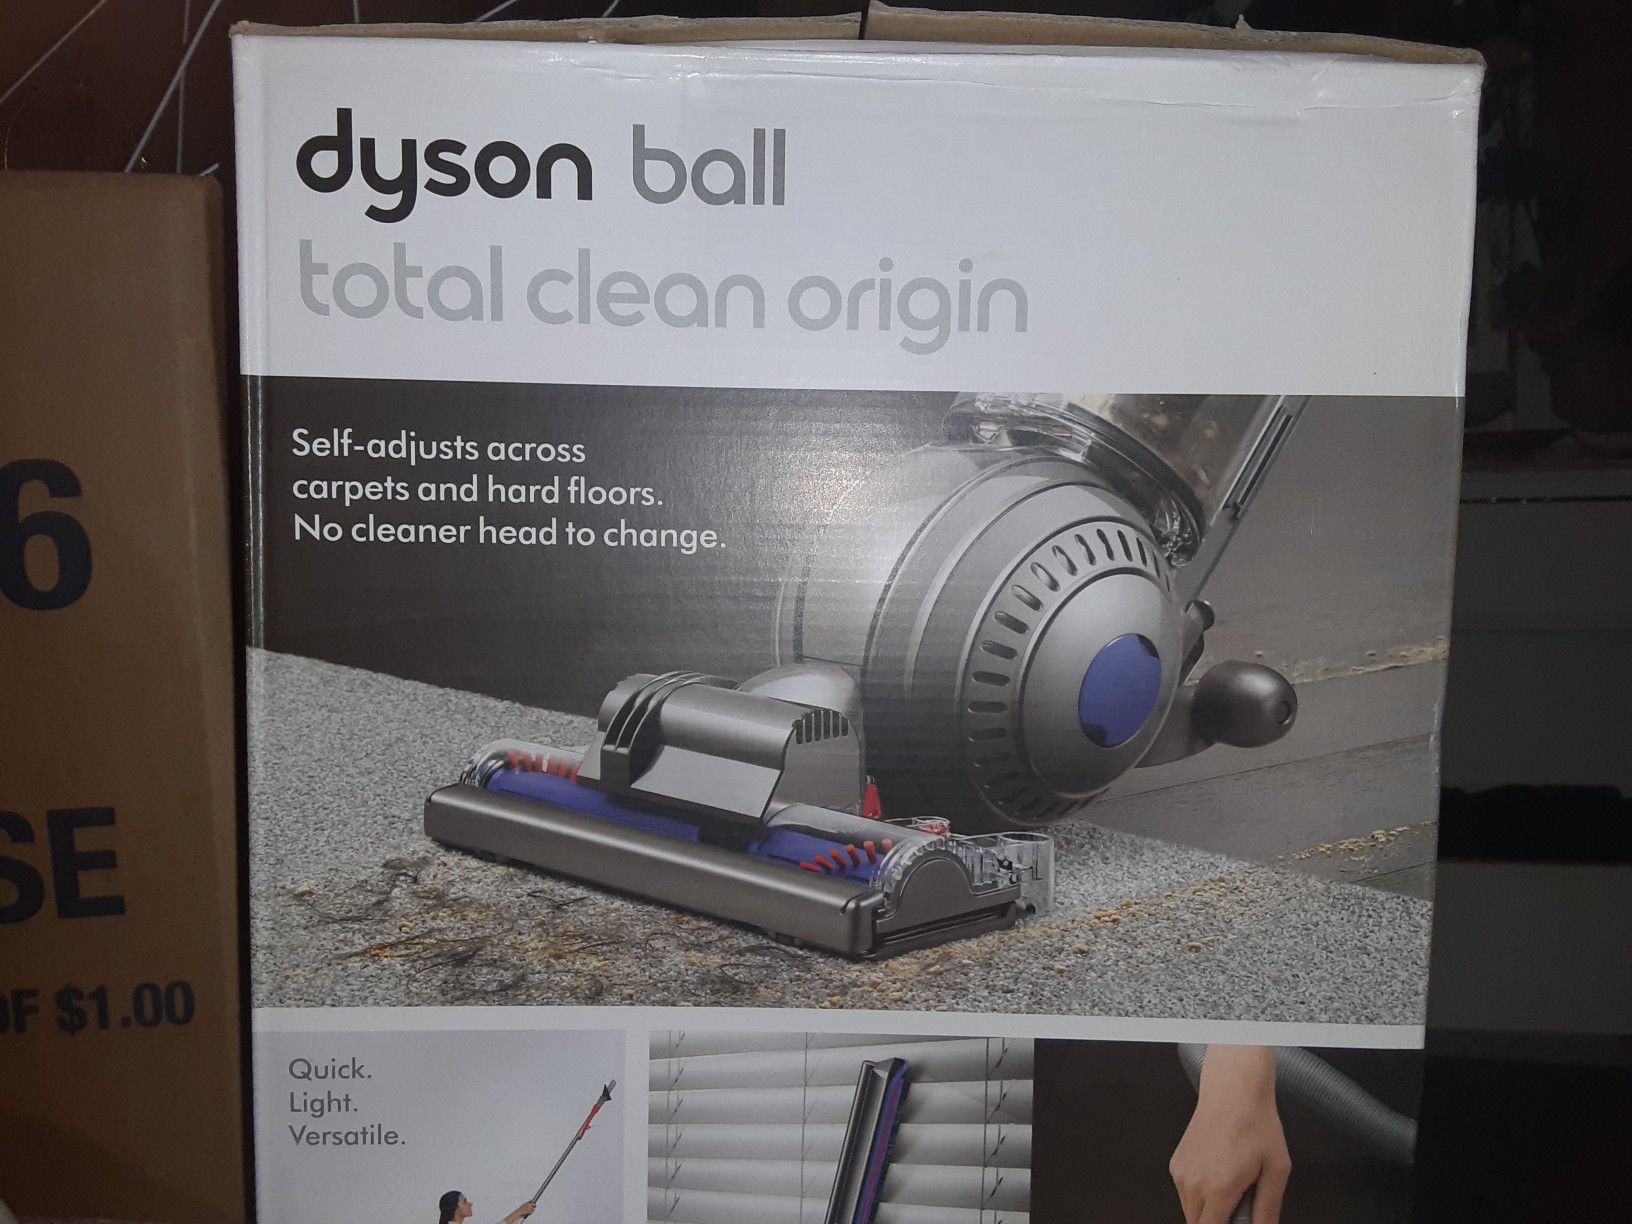 DYSON ORIGIN TOTAL CLEAN VACUUM CLEANER. BRAND NEW IN BOX!!! THIS WEEKEND SPECIAL